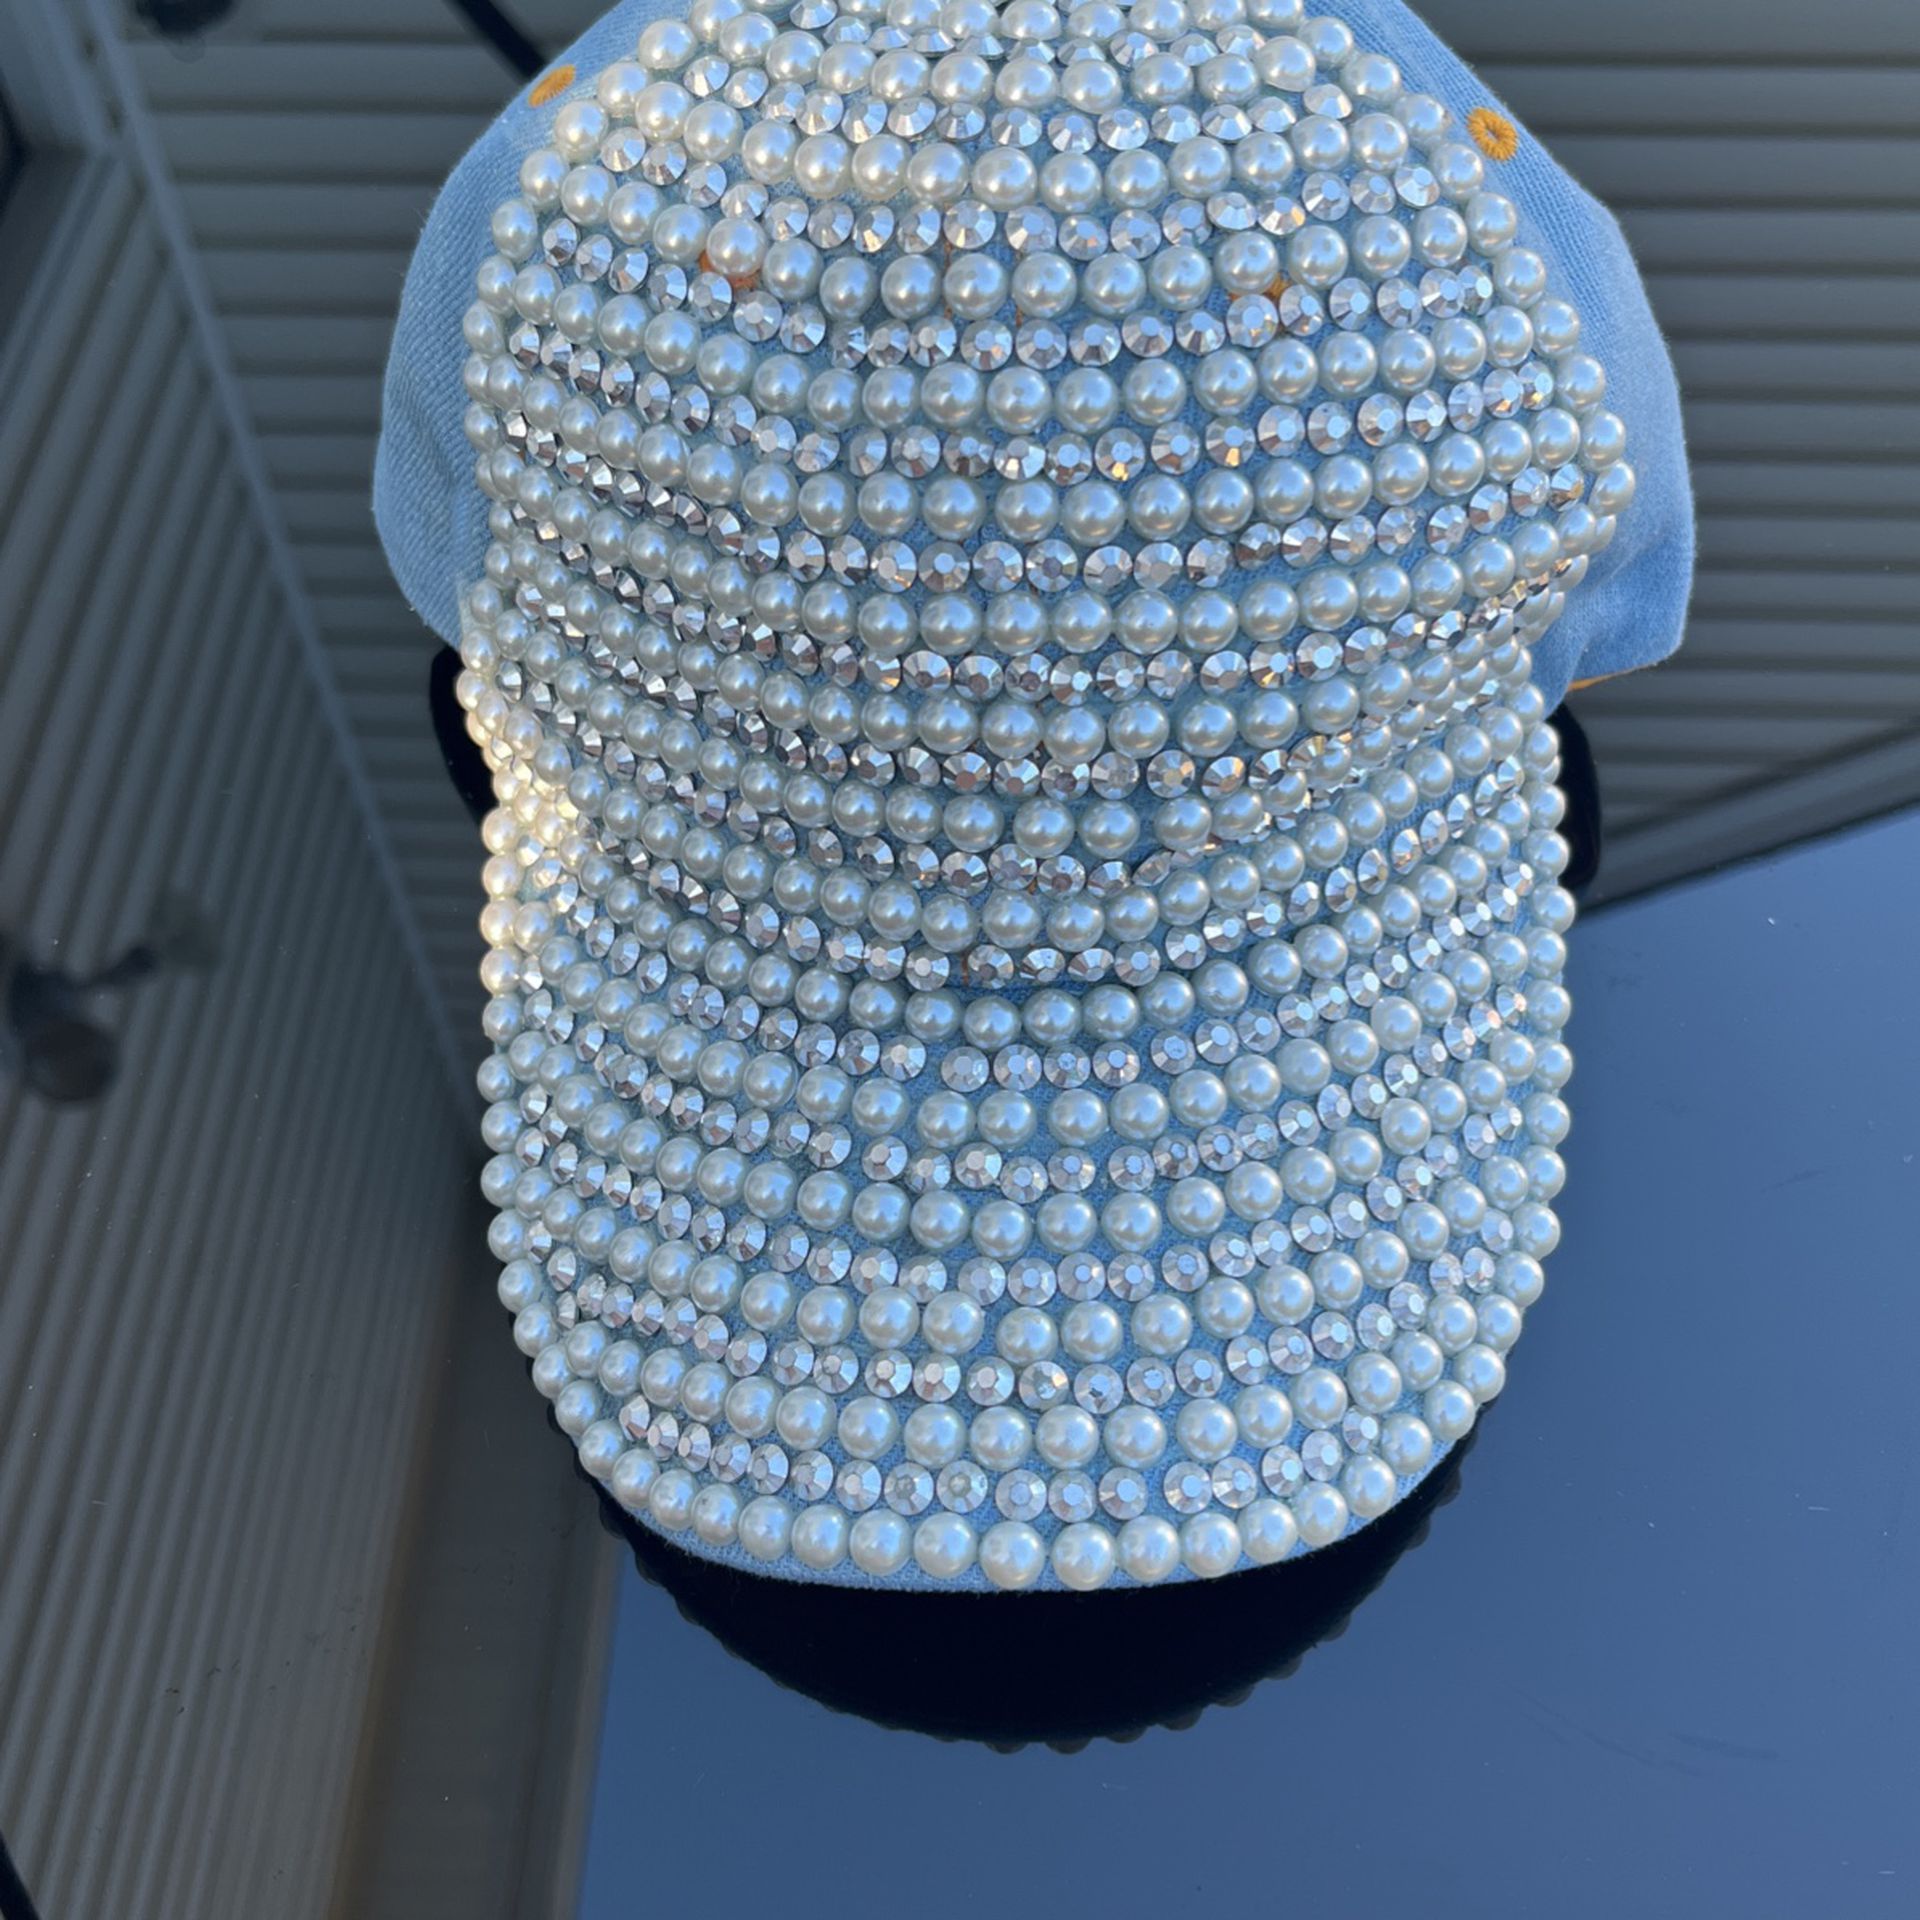 Stylish Jean Hat With Pearls (ADJUSTABLE)